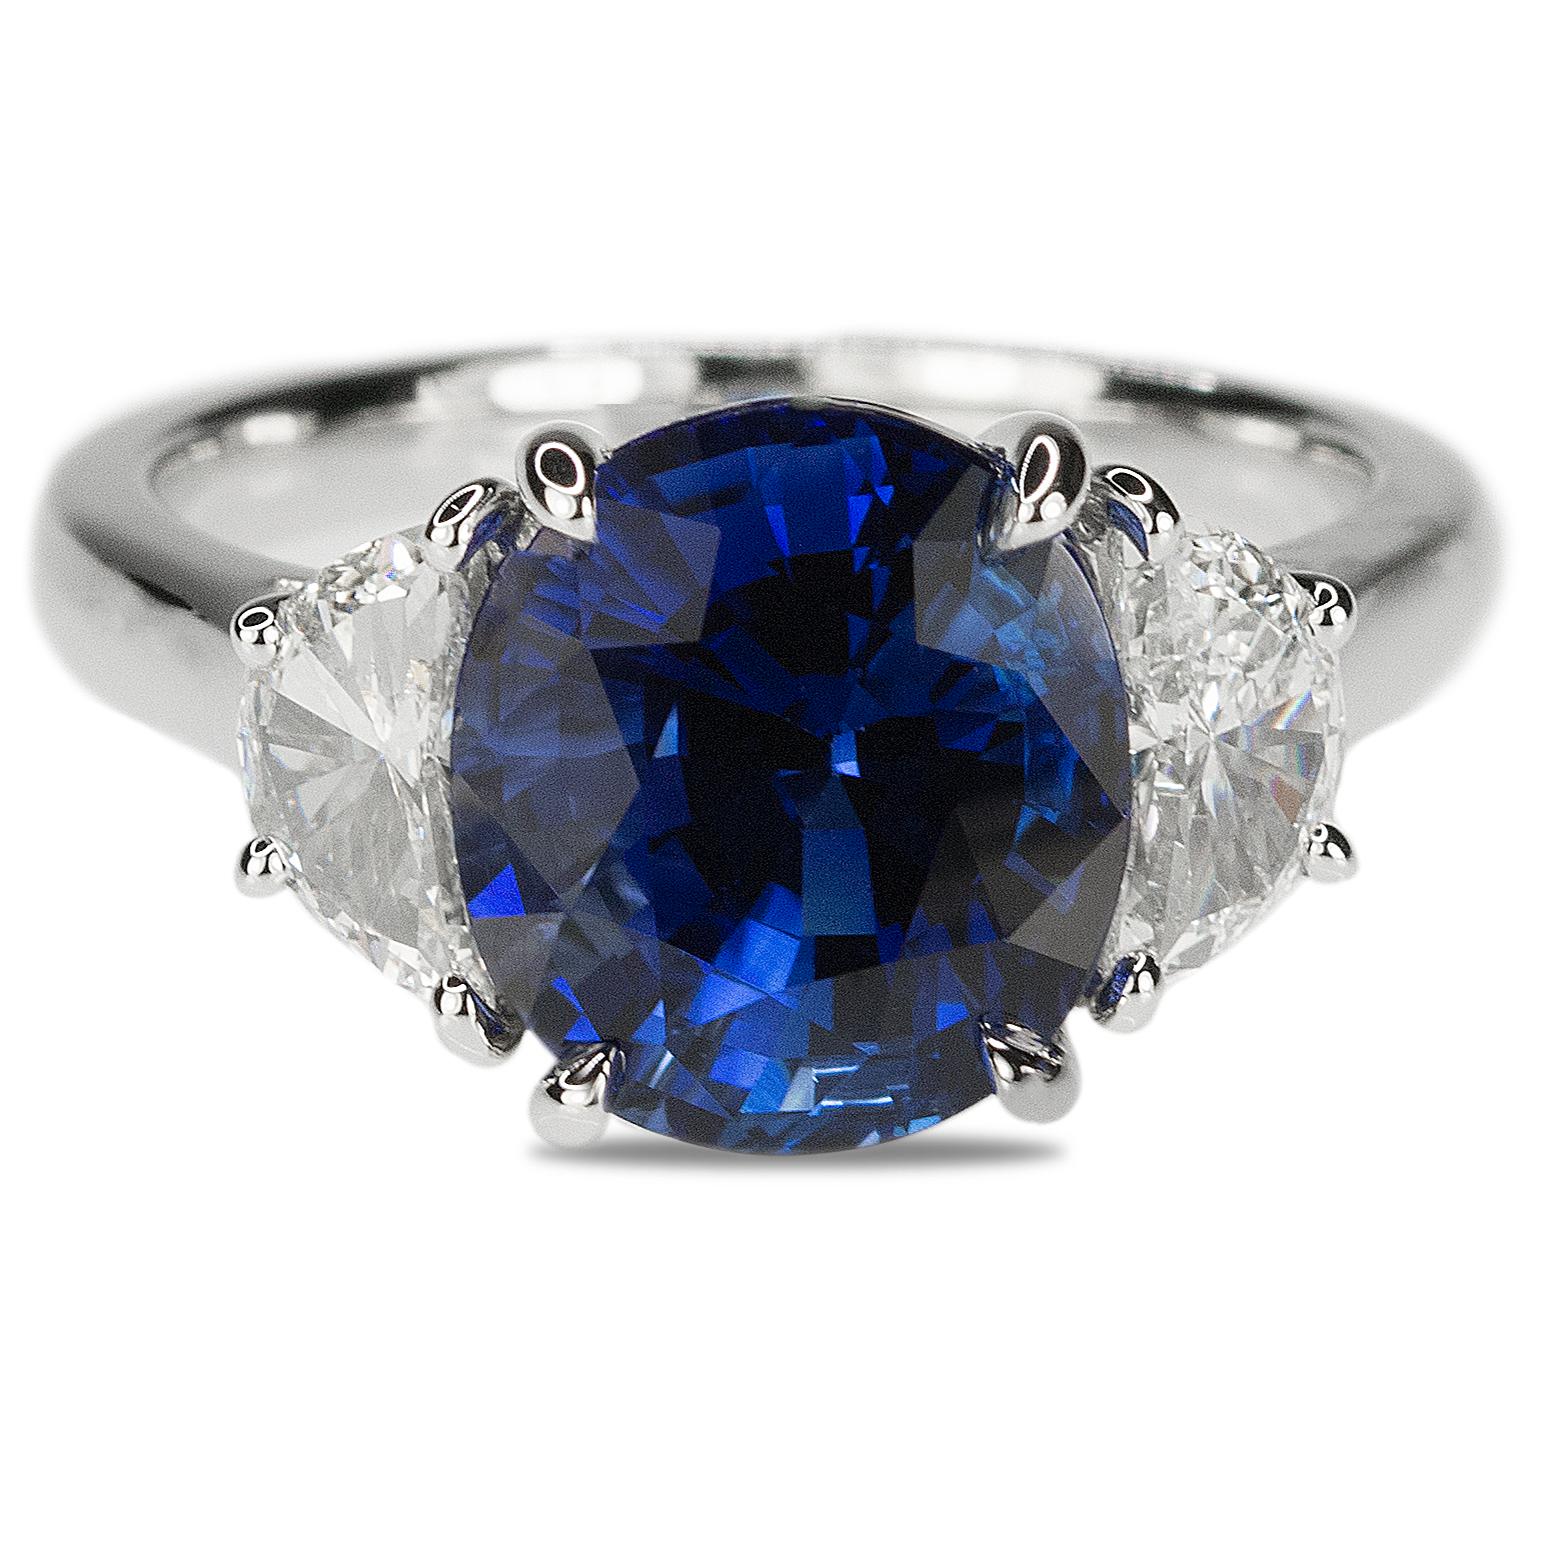 Platinum Ring with one AGL certified 5.18 carat Ceylon Sapphire an two half moons weighing 0.80 carats. 8.19g